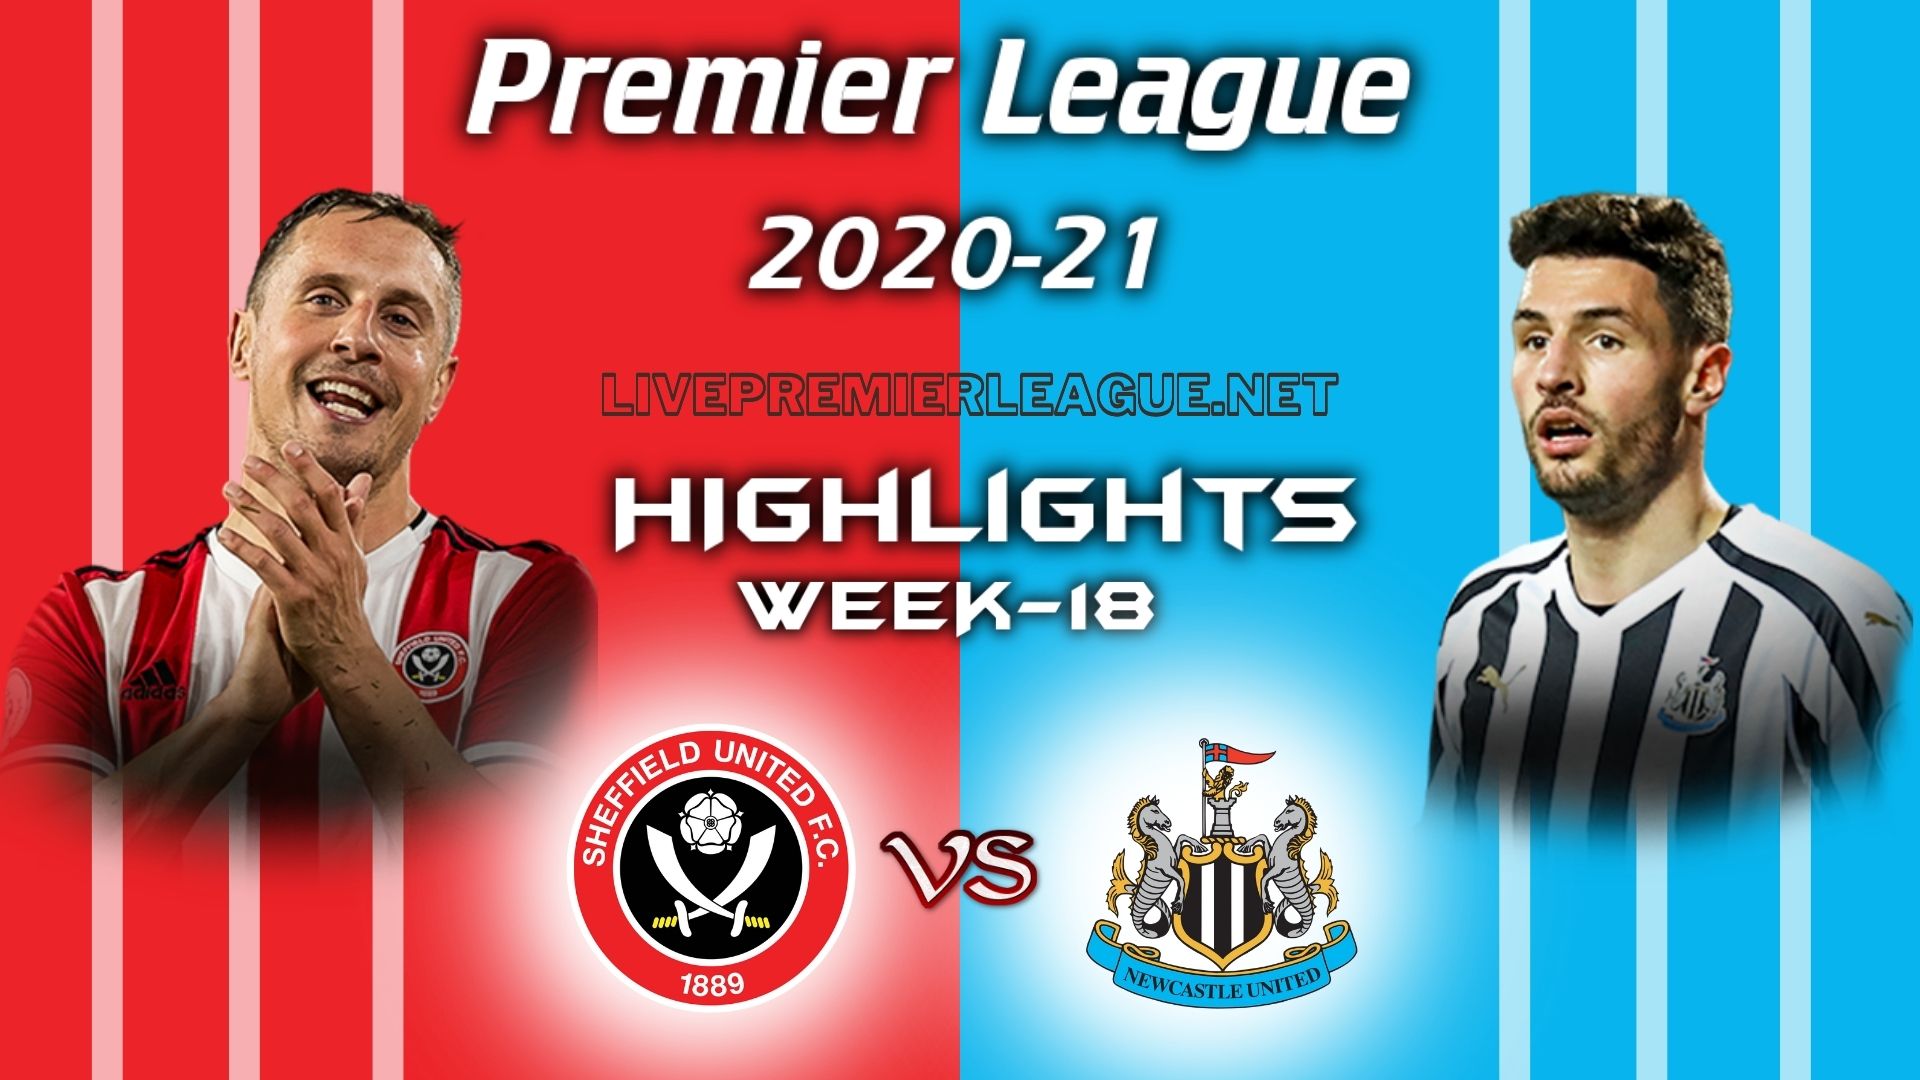 Sheffield United Vs Newcastle United Extended Highlights 2021 Week 18